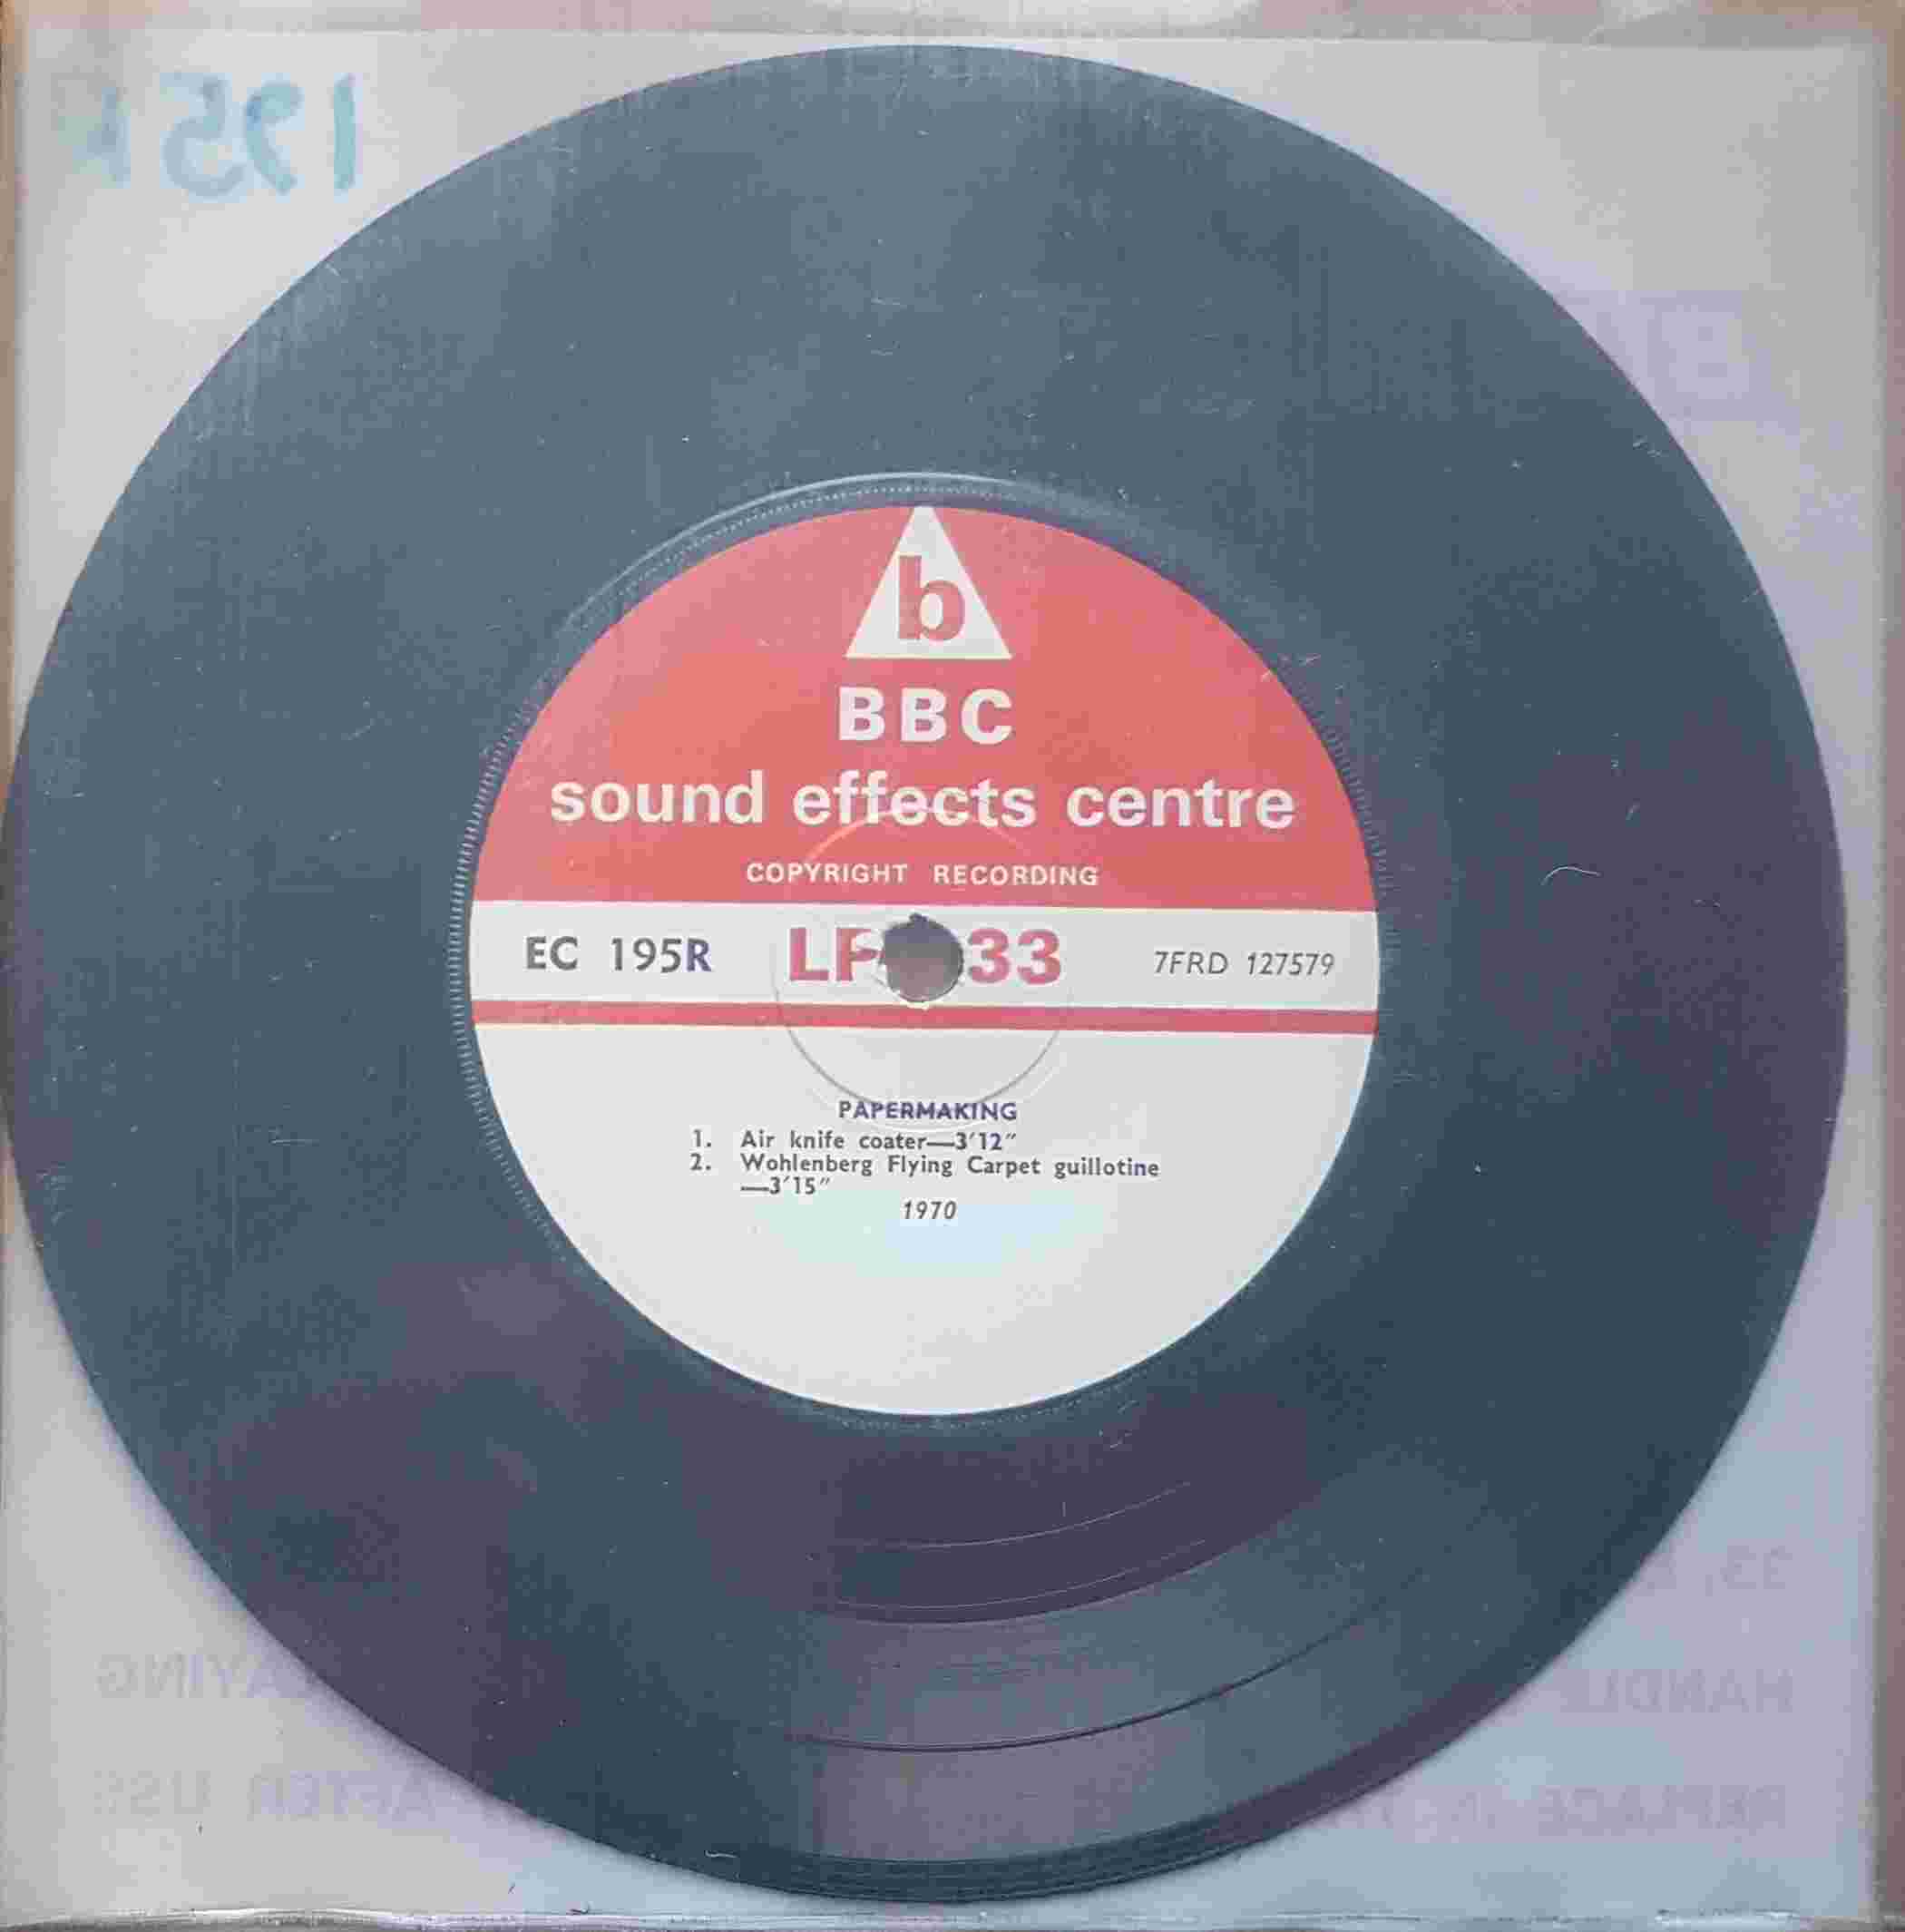 Picture of EC 195R Papermaking by artist Not registered from the BBC records and Tapes library